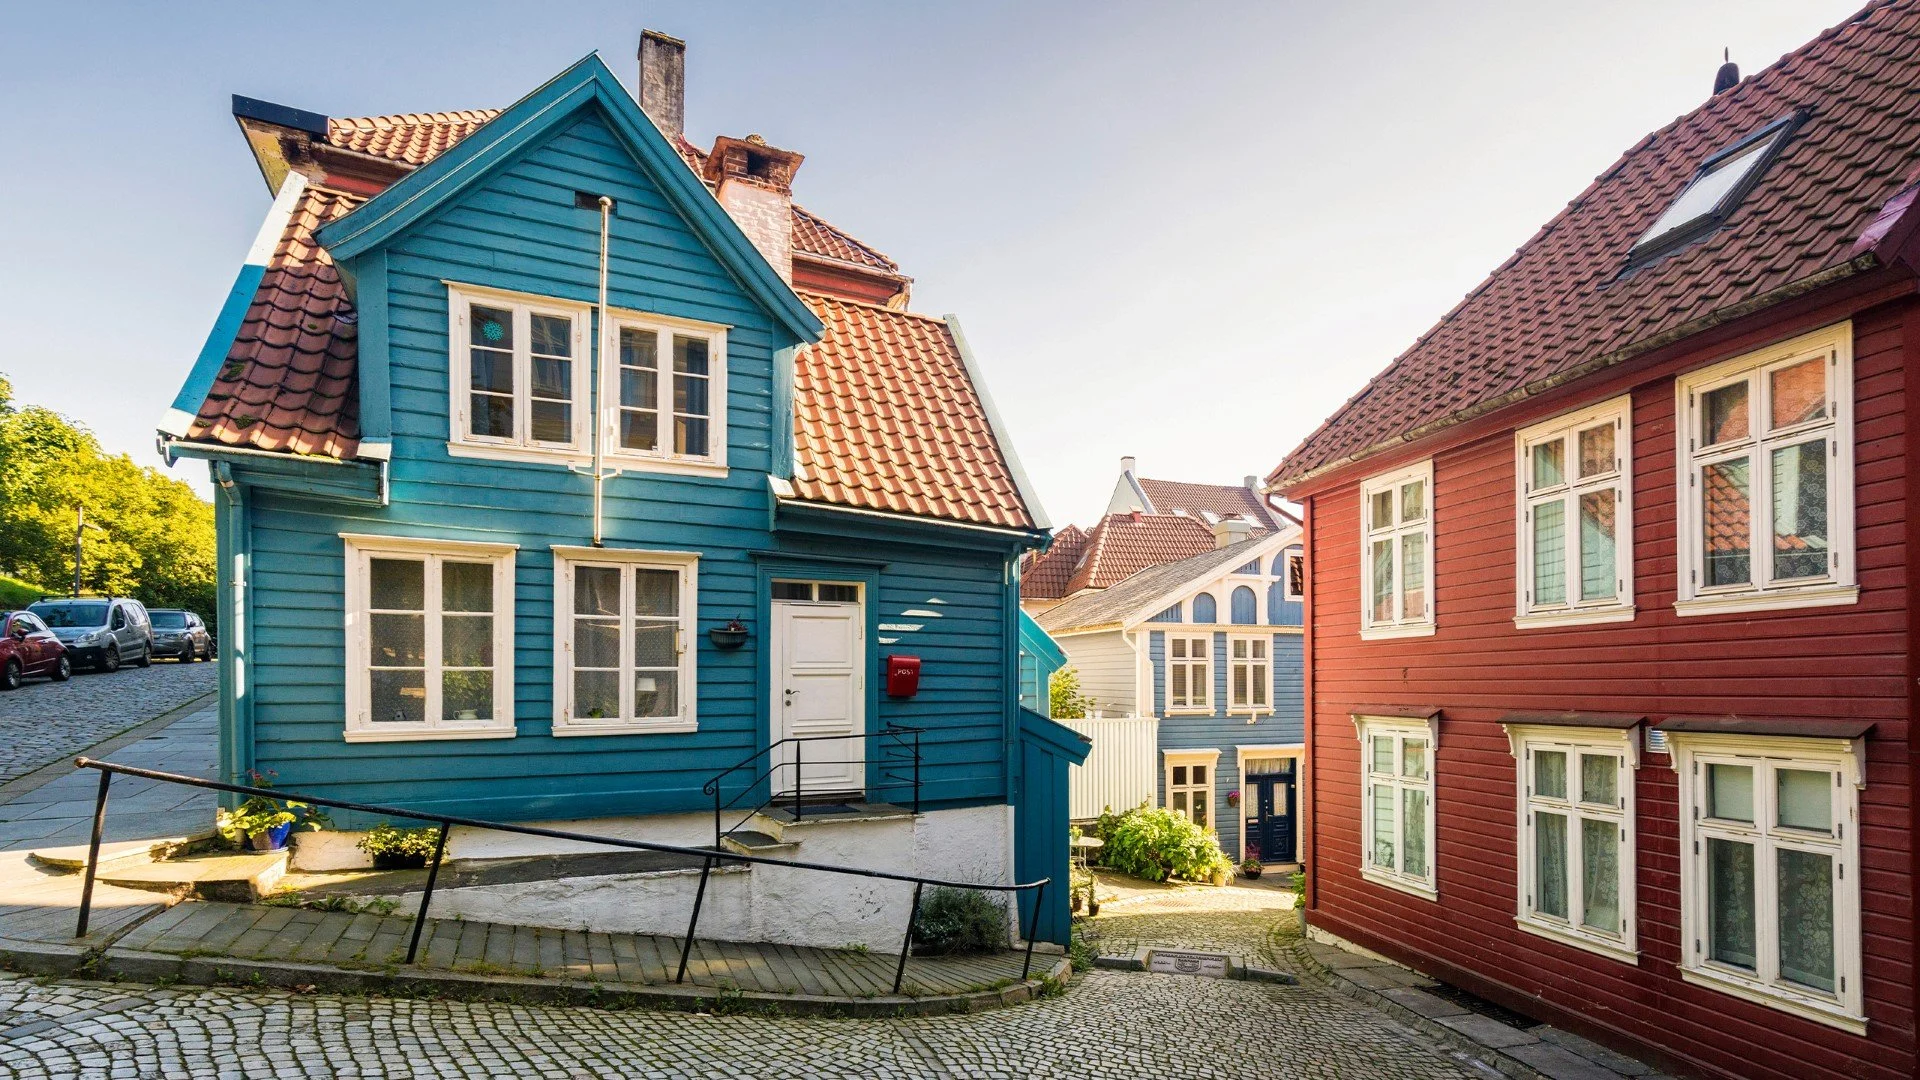 The old town in Bergen with painted wooden houses